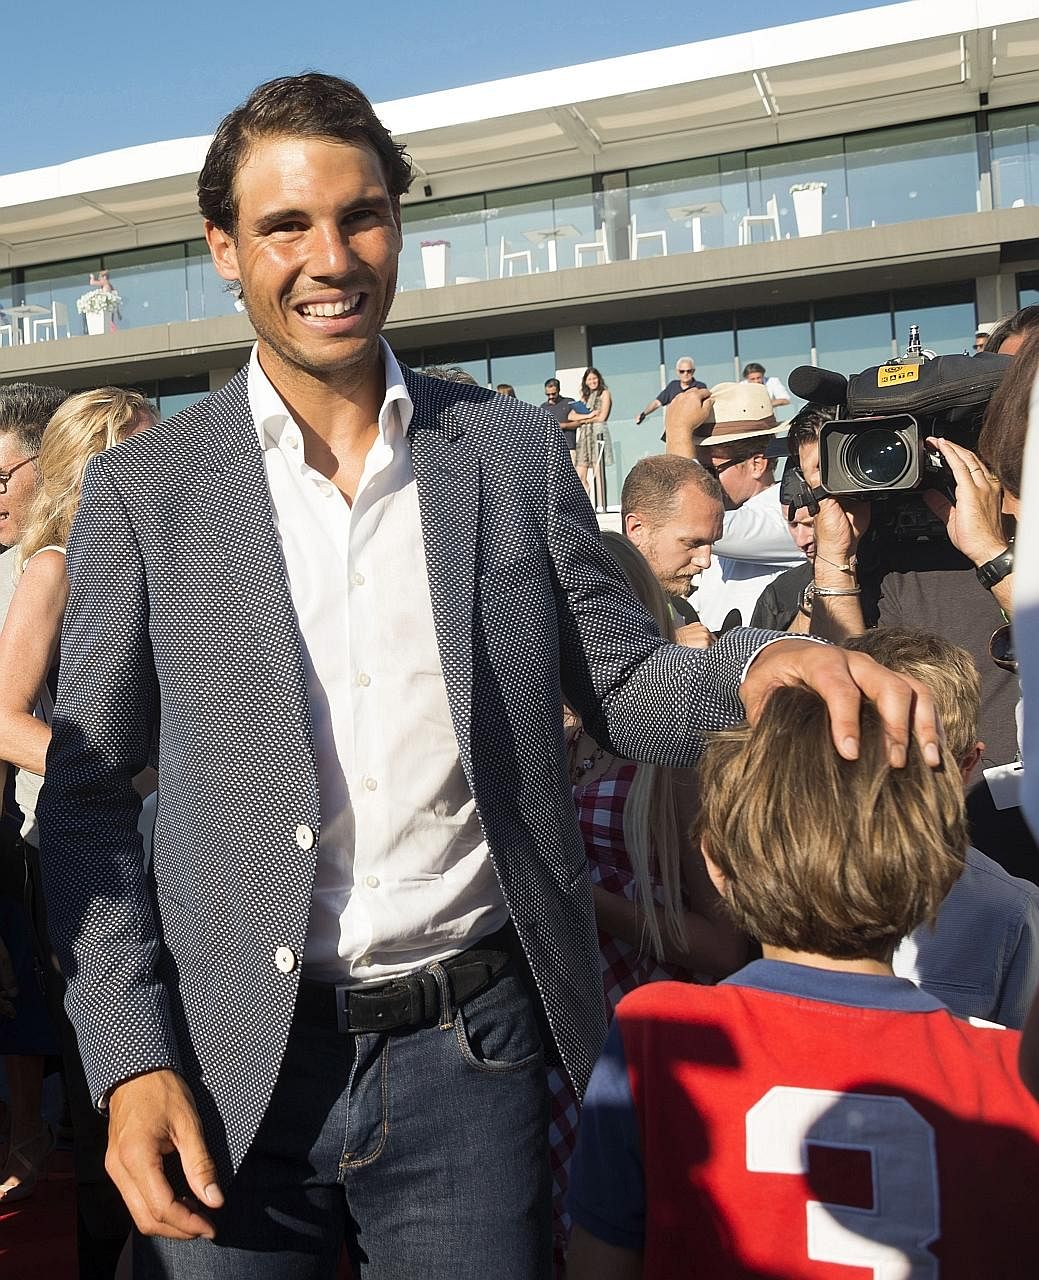 Rafael Nadal attending a graduation ceremony of pupils of the American International School of Mallorca in his tennis academy on Tuesday. The Spaniard had clinched his 10th French Open title on Sunday.